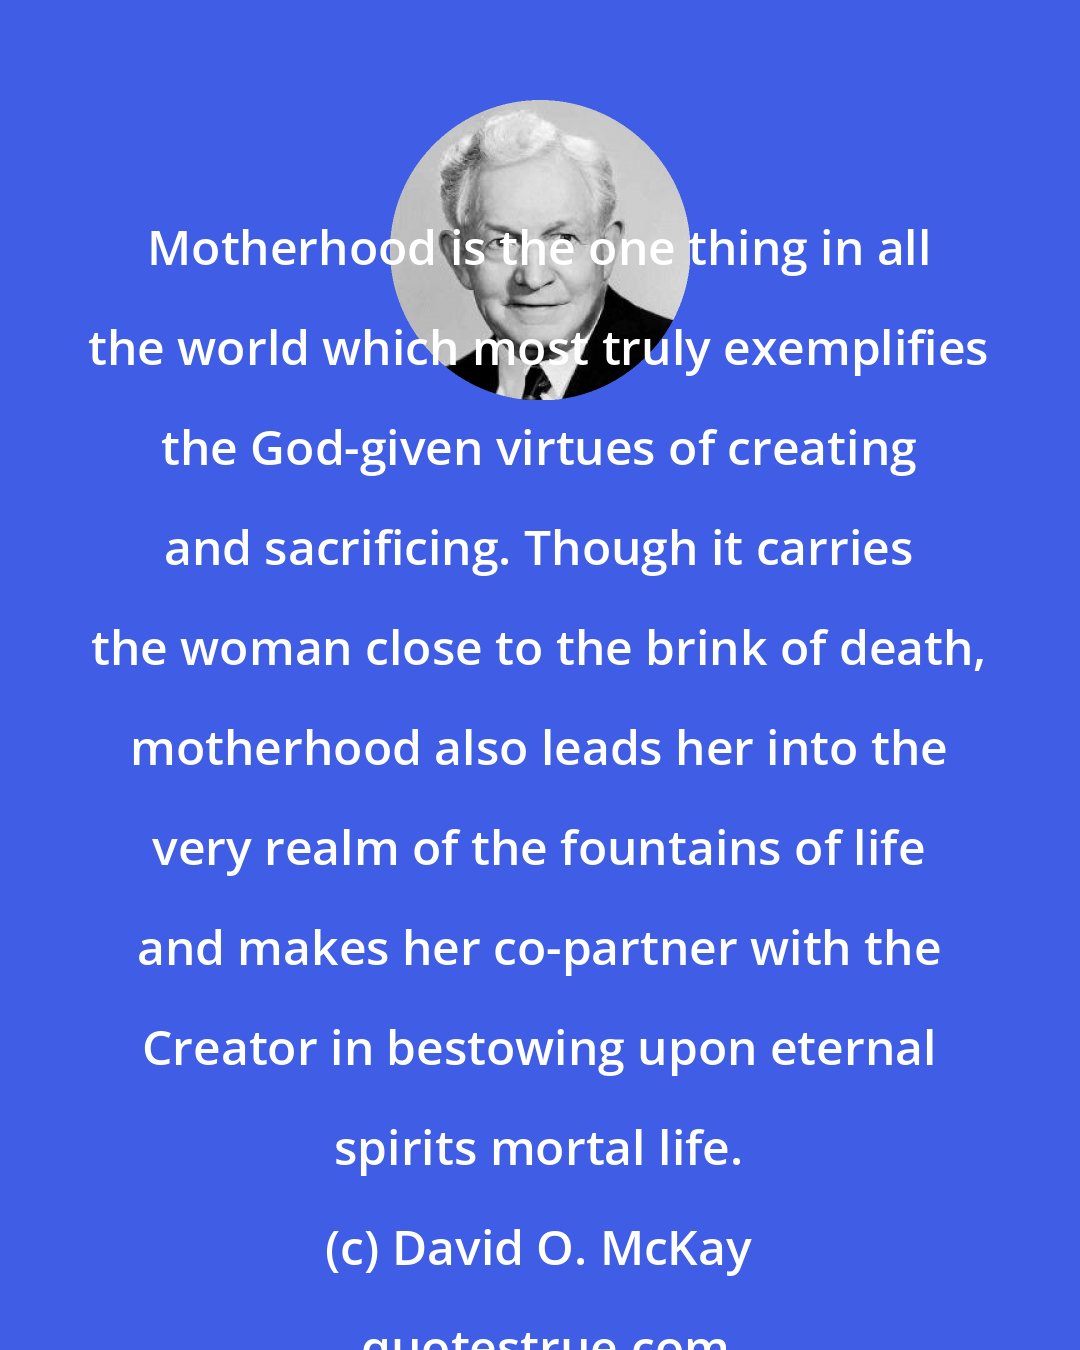 David O. McKay: Motherhood is the one thing in all the world which most truly exemplifies the God-given virtues of creating and sacrificing. Though it carries the woman close to the brink of death, motherhood also leads her into the very realm of the fountains of life and makes her co-partner with the Creator in bestowing upon eternal spirits mortal life.